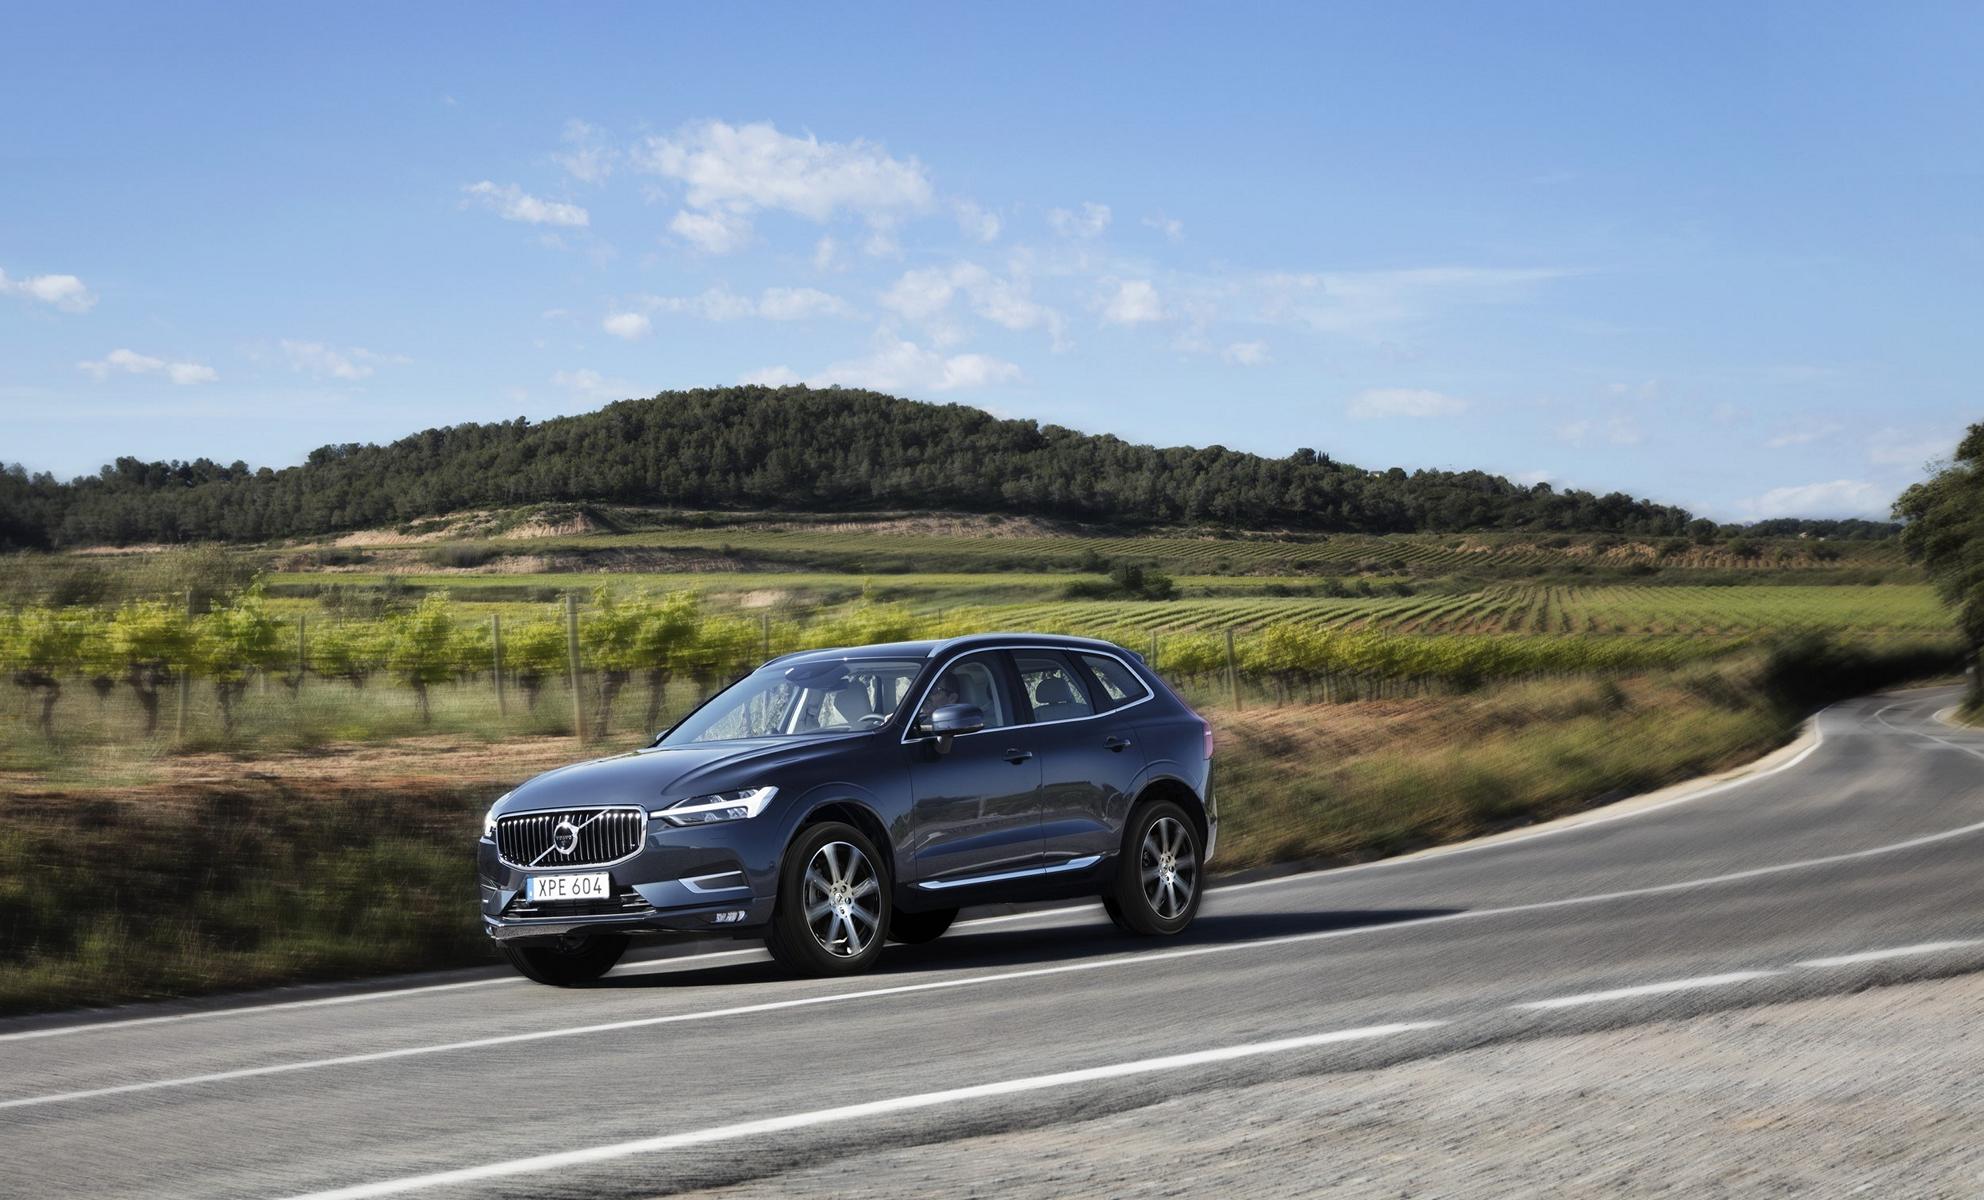 K1600 208153 The new Volvo XC60 T6